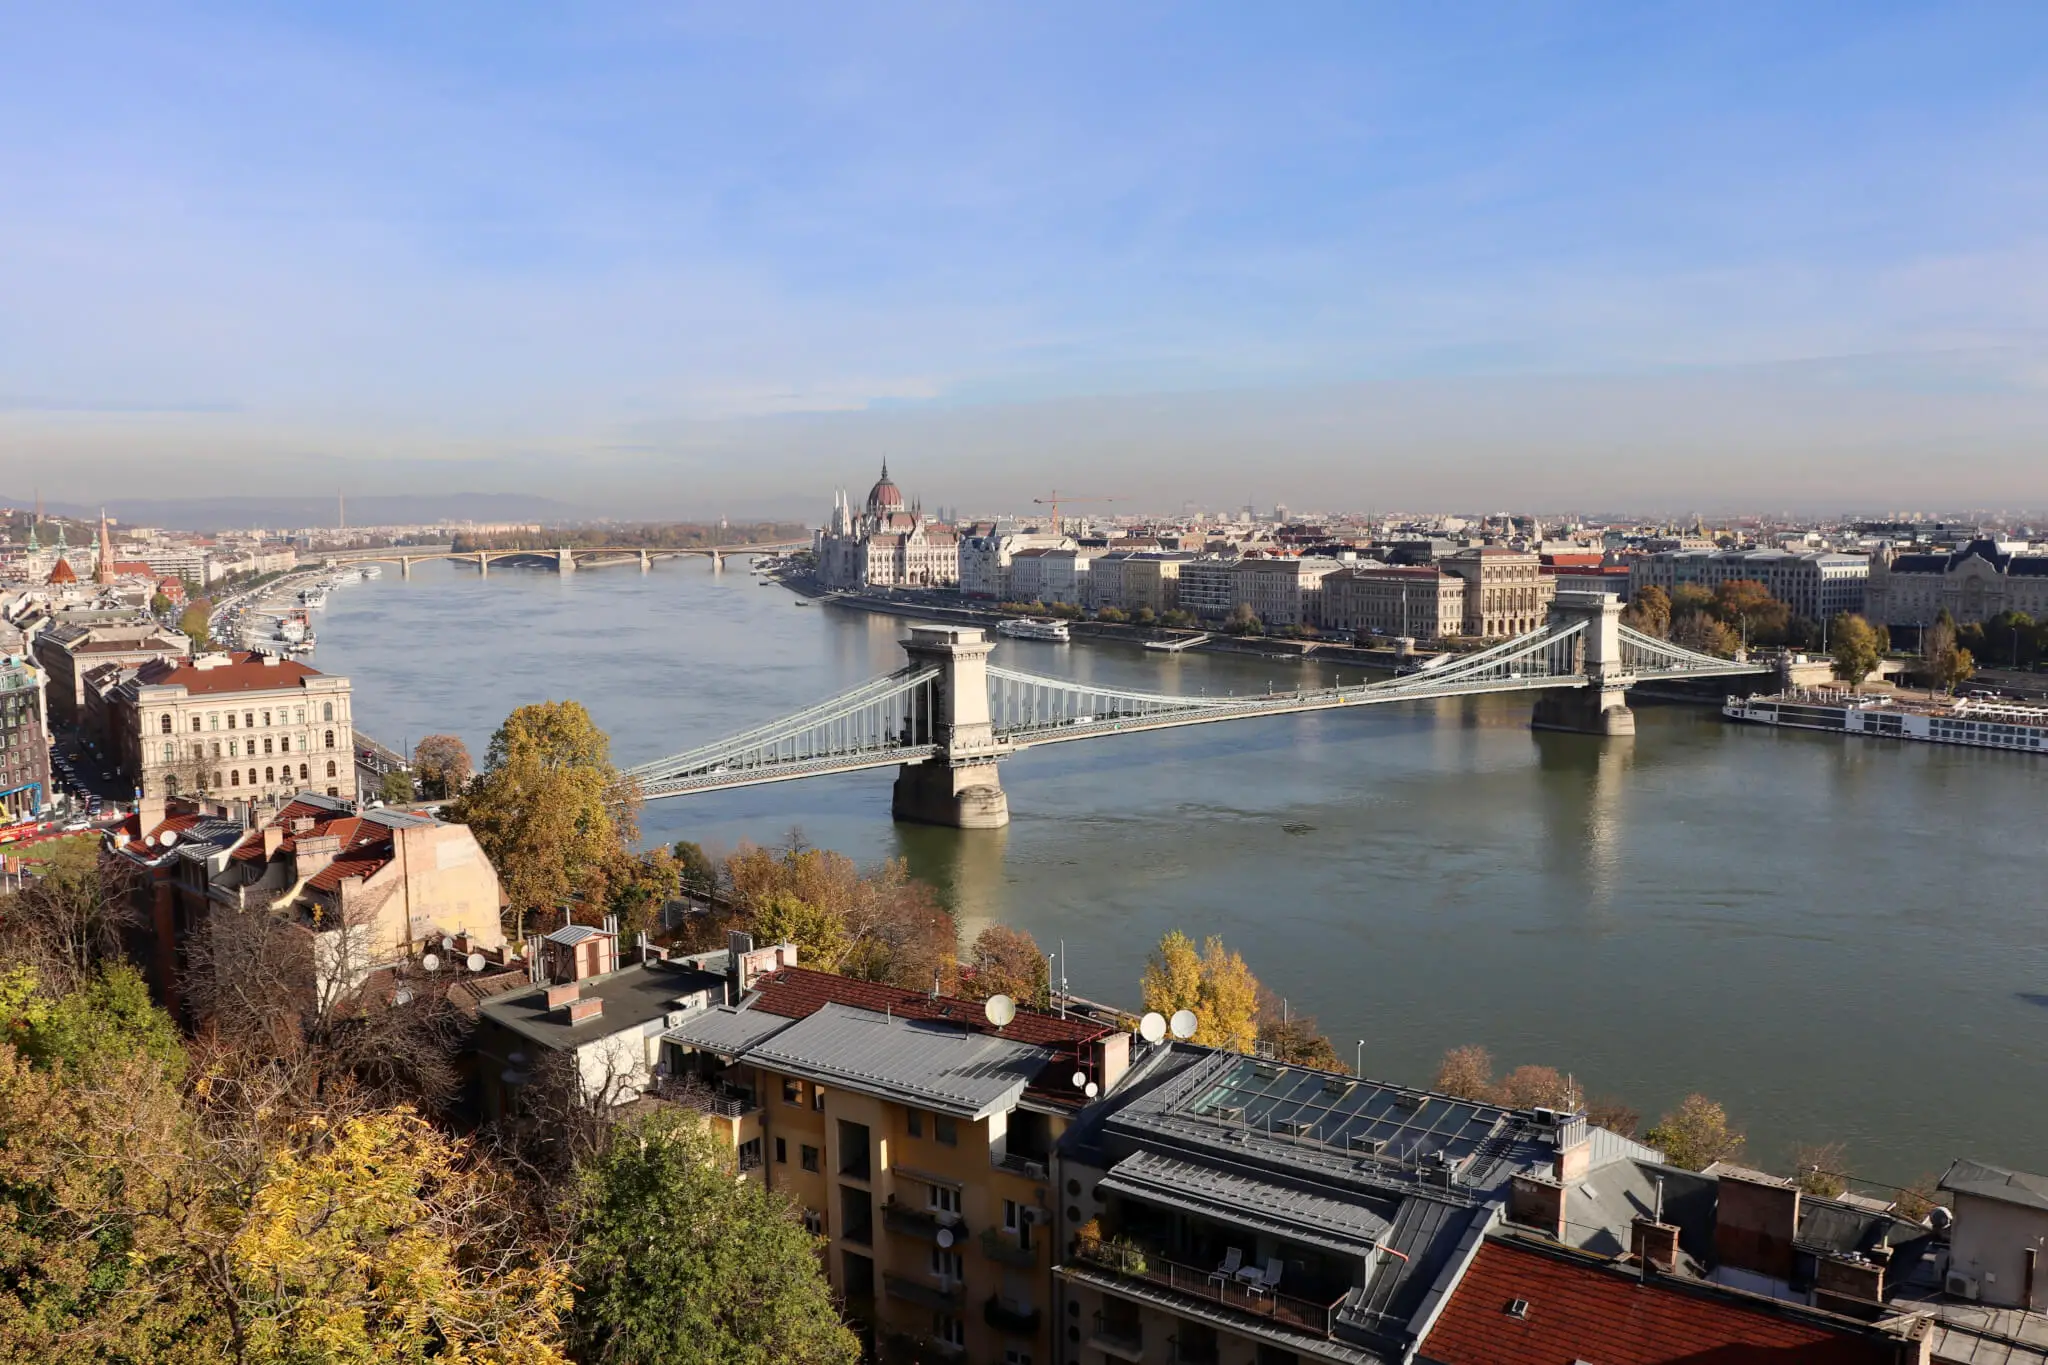 City view of Budapest, with Danube River and bridges